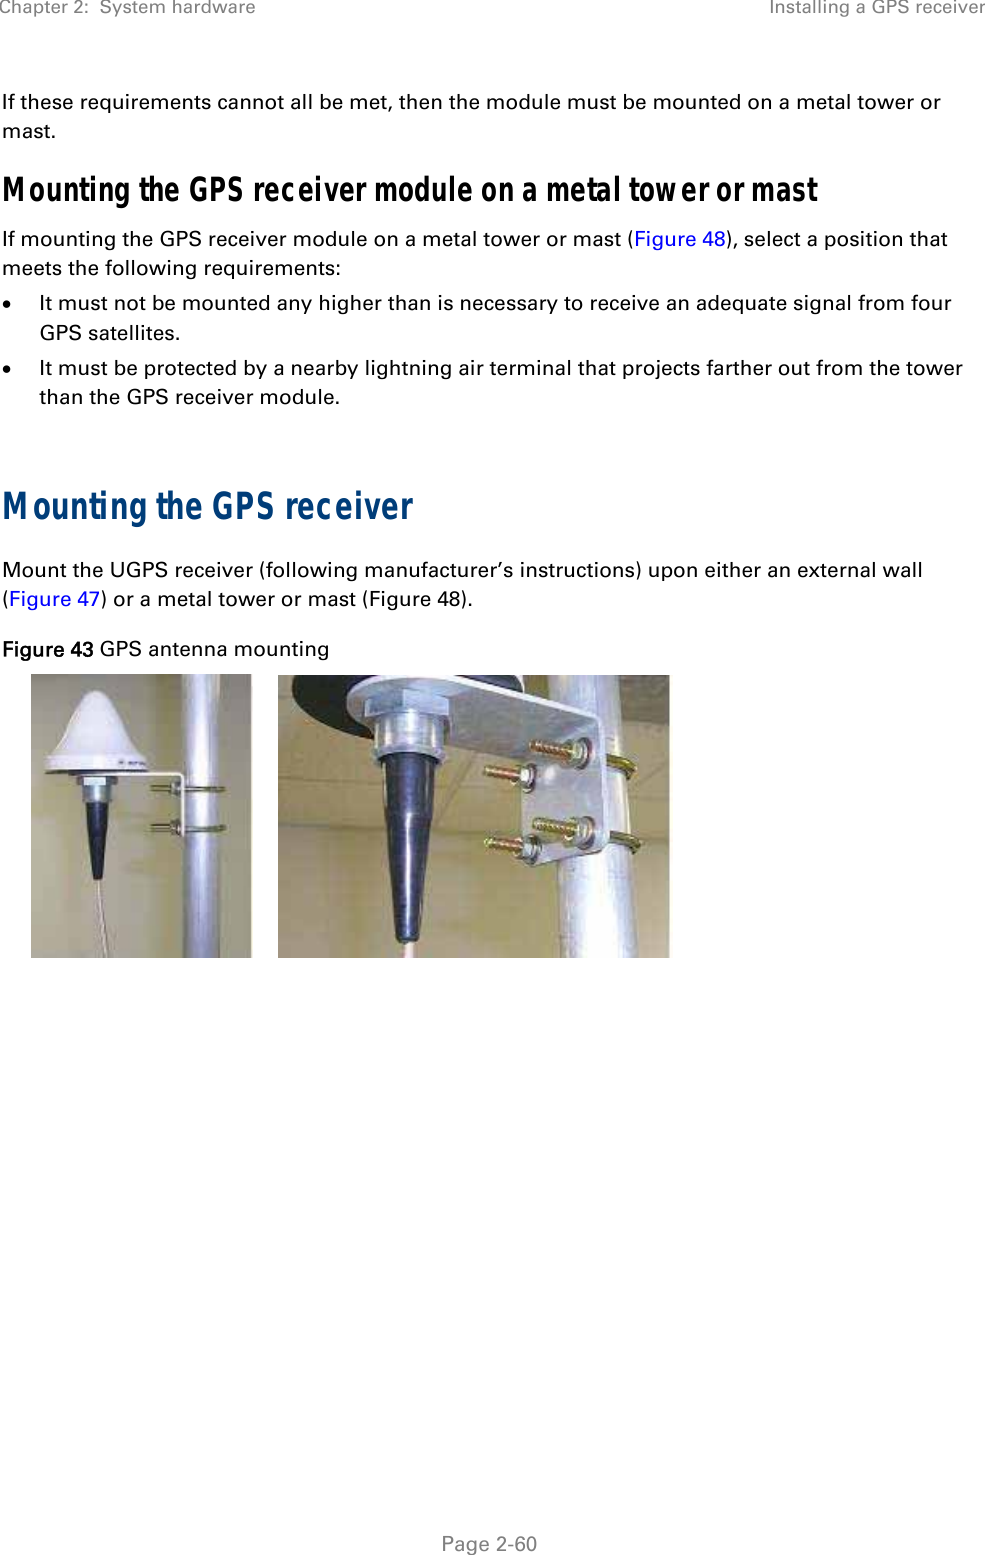 Chapter 2:  System hardware  Installing a GPS receiver   Page 2-60 If these requirements cannot all be met, then the module must be mounted on a metal tower or mast. Mounting the GPS receiver module on a metal tower or mast If mounting the GPS receiver module on a metal tower or mast (Figure 48), select a position that meets the following requirements:  It must not be mounted any higher than is necessary to receive an adequate signal from four GPS satellites.  It must be protected by a nearby lightning air terminal that projects farther out from the tower than the GPS receiver module.  Mounting the GPS receiver Mount the UGPS receiver (following manufacturer’s instructions) upon either an external wall (Figure 47) or a metal tower or mast (Figure 48). Figure 43 GPS antenna mounting    